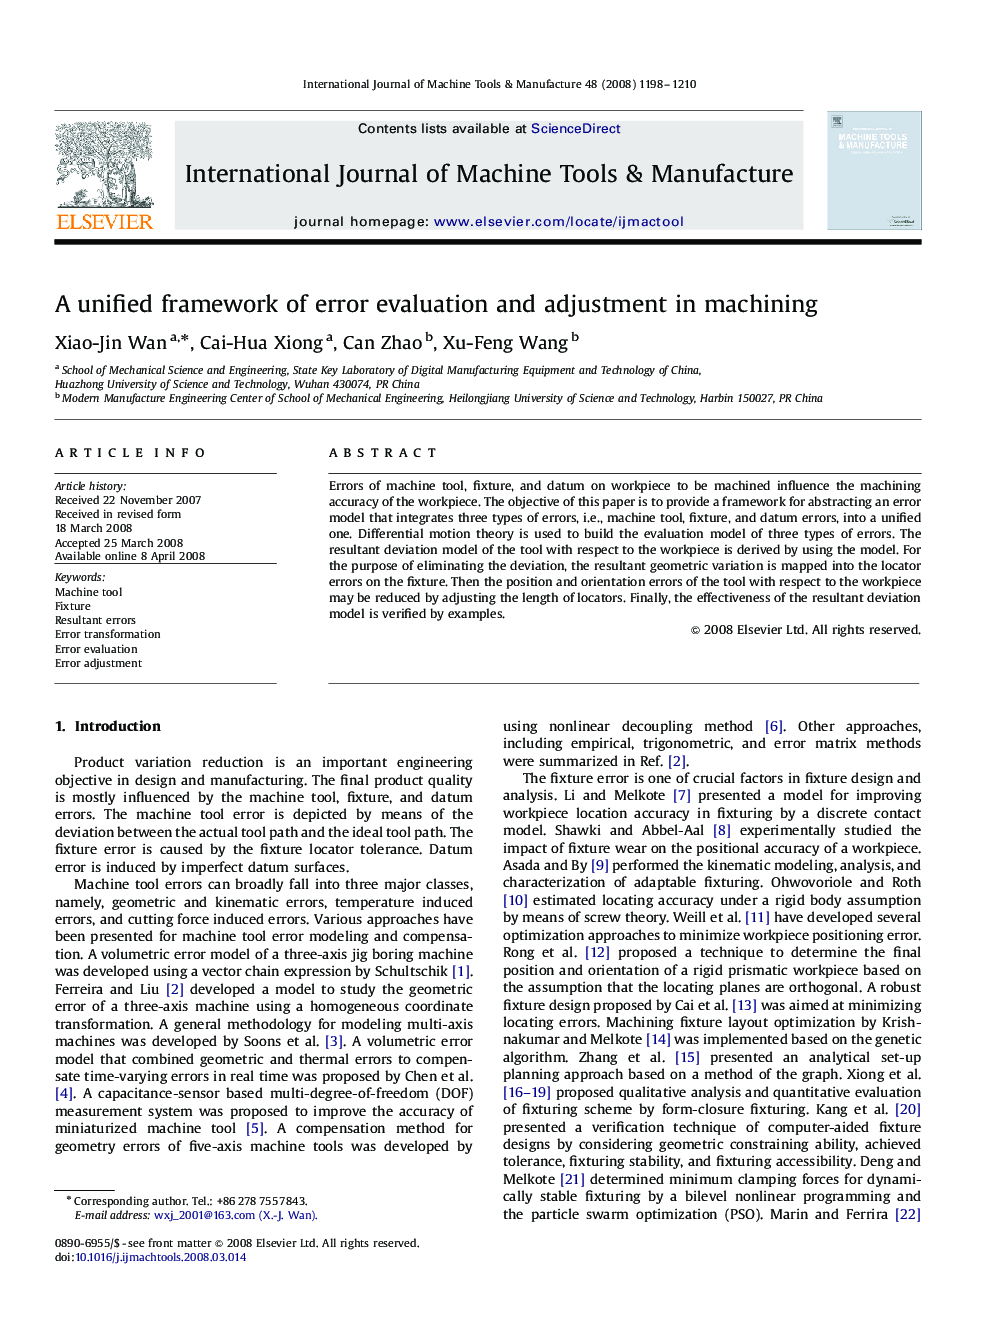 A unified framework of error evaluation and adjustment in machining